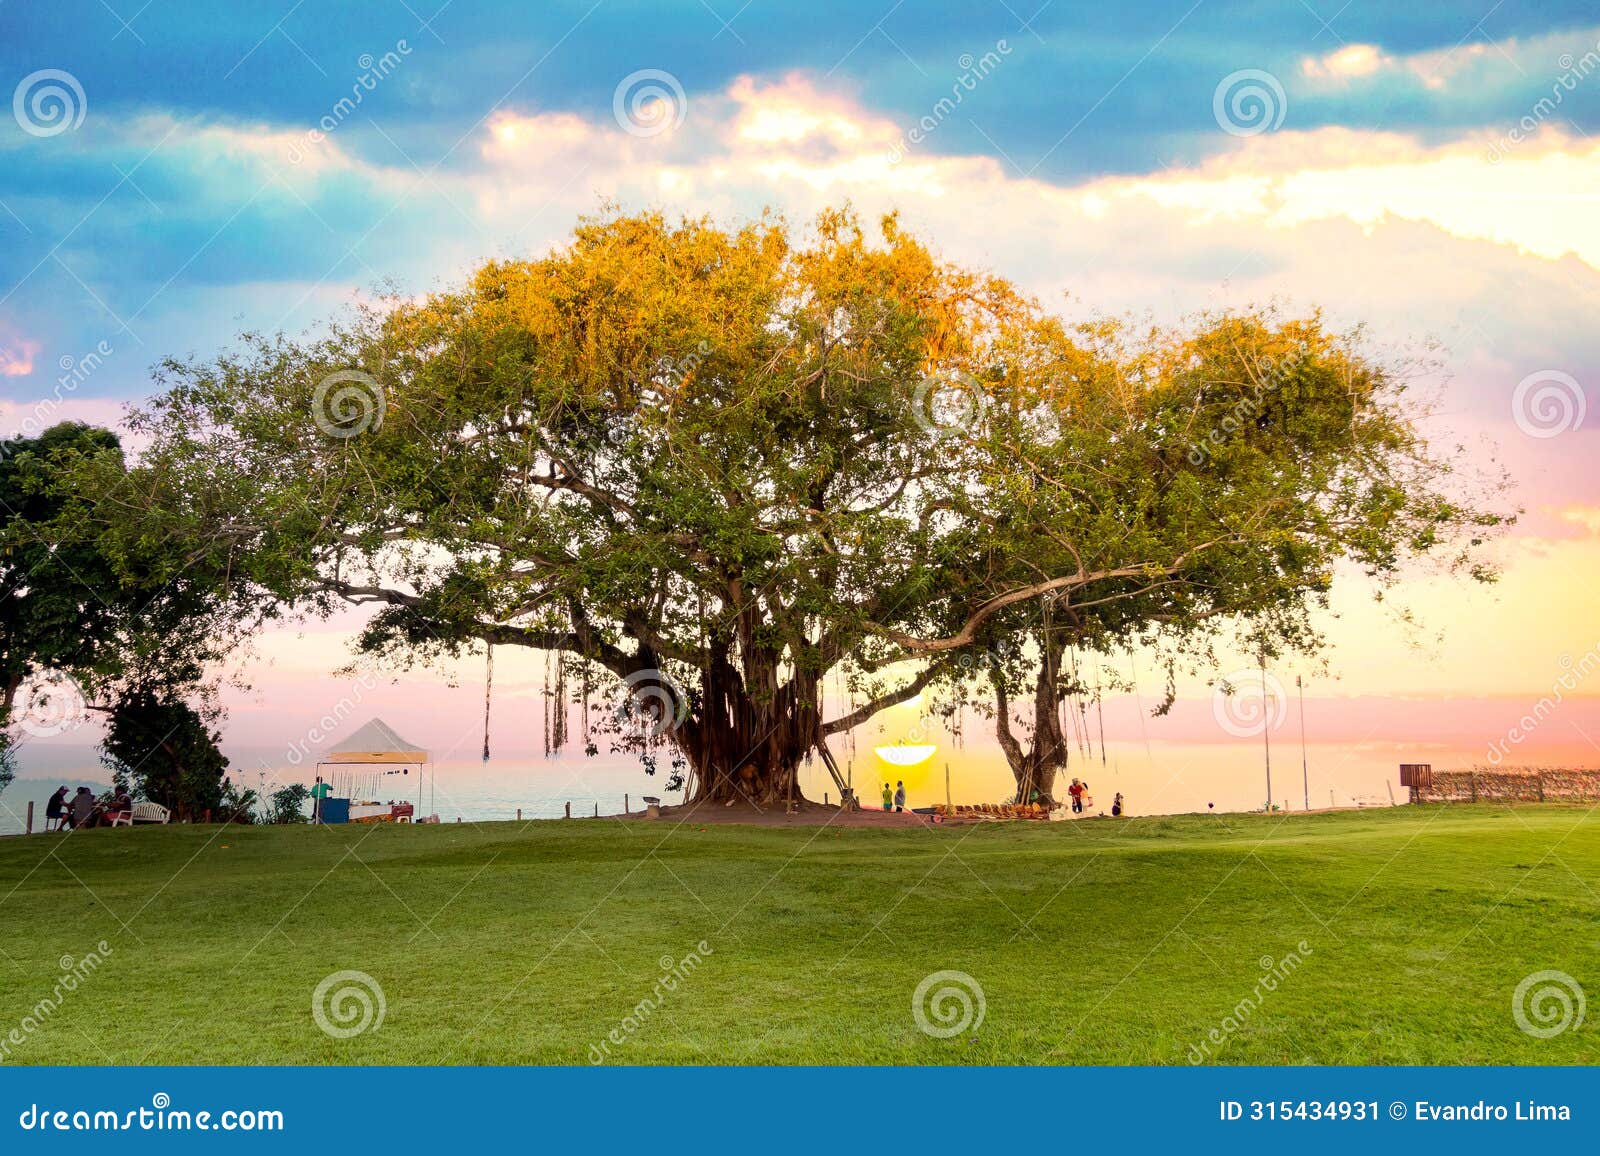 centennial tree located in the historic center of the old town of porto seguro, in the state of bahia, brazil